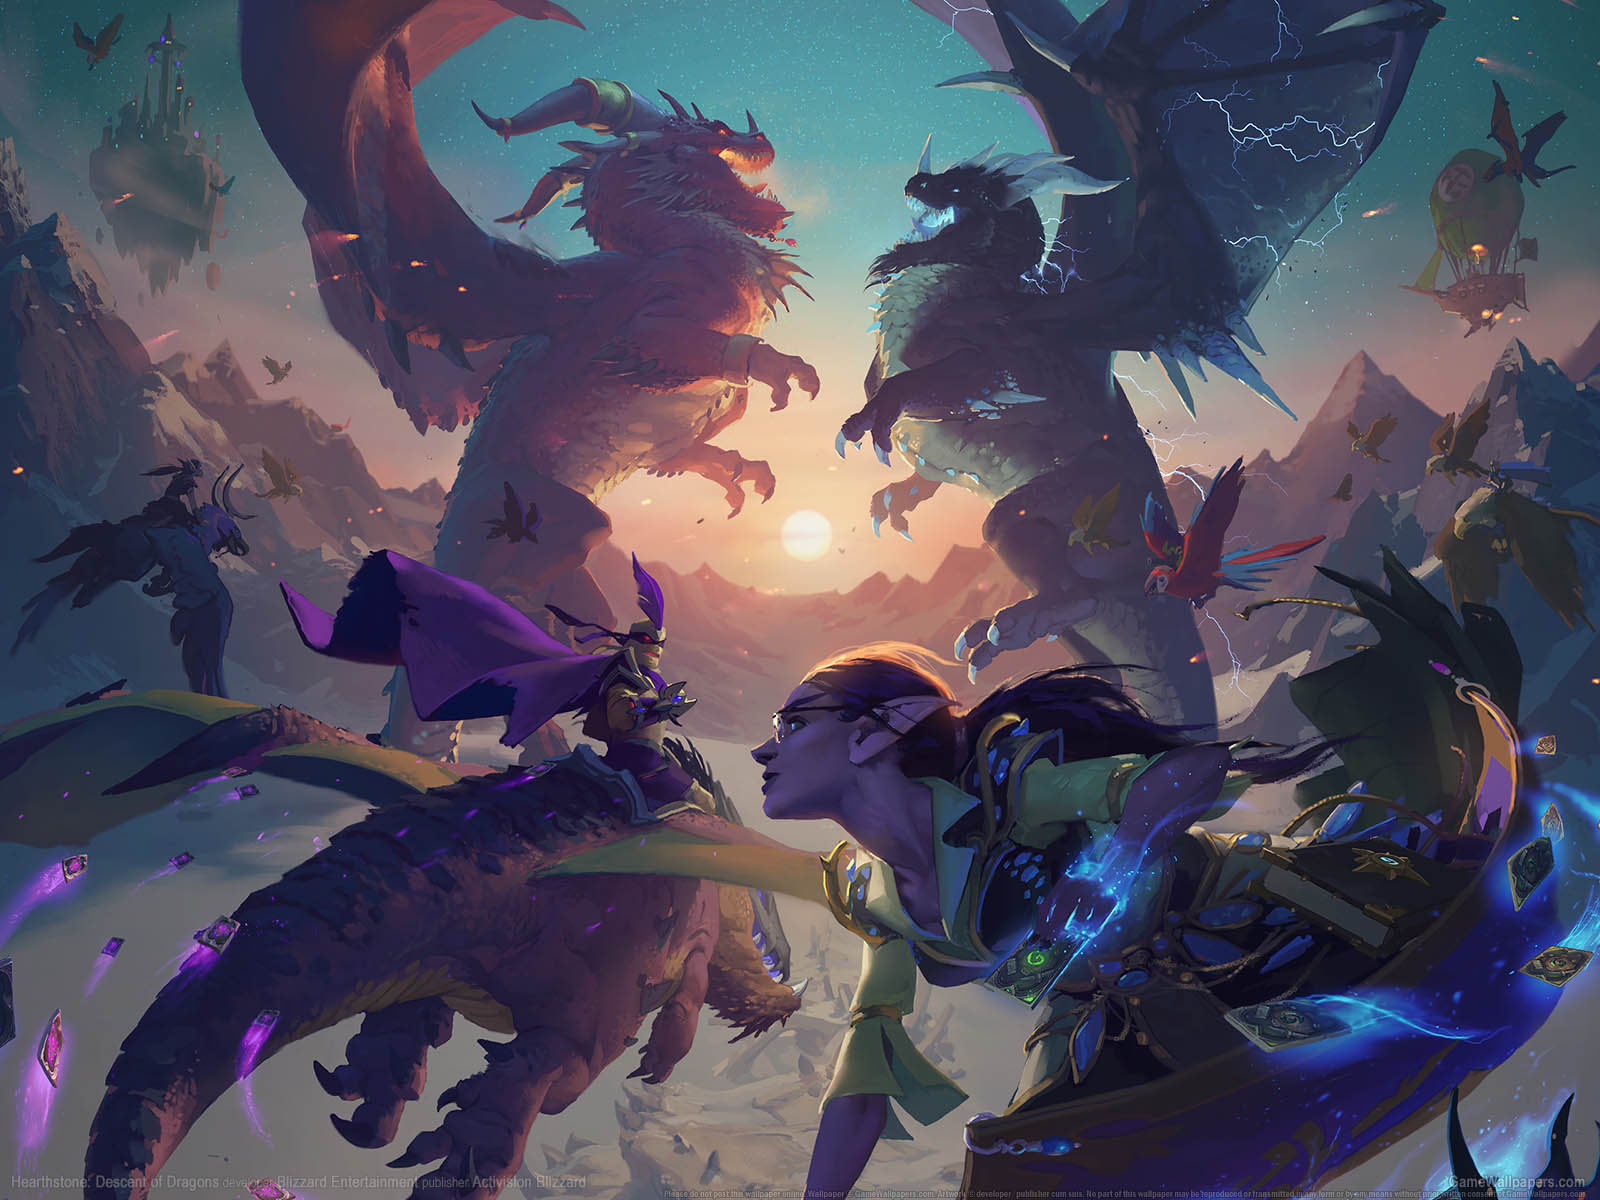 Hearthstone%3A Descent of Dragons achtergrond 01 1600x1200